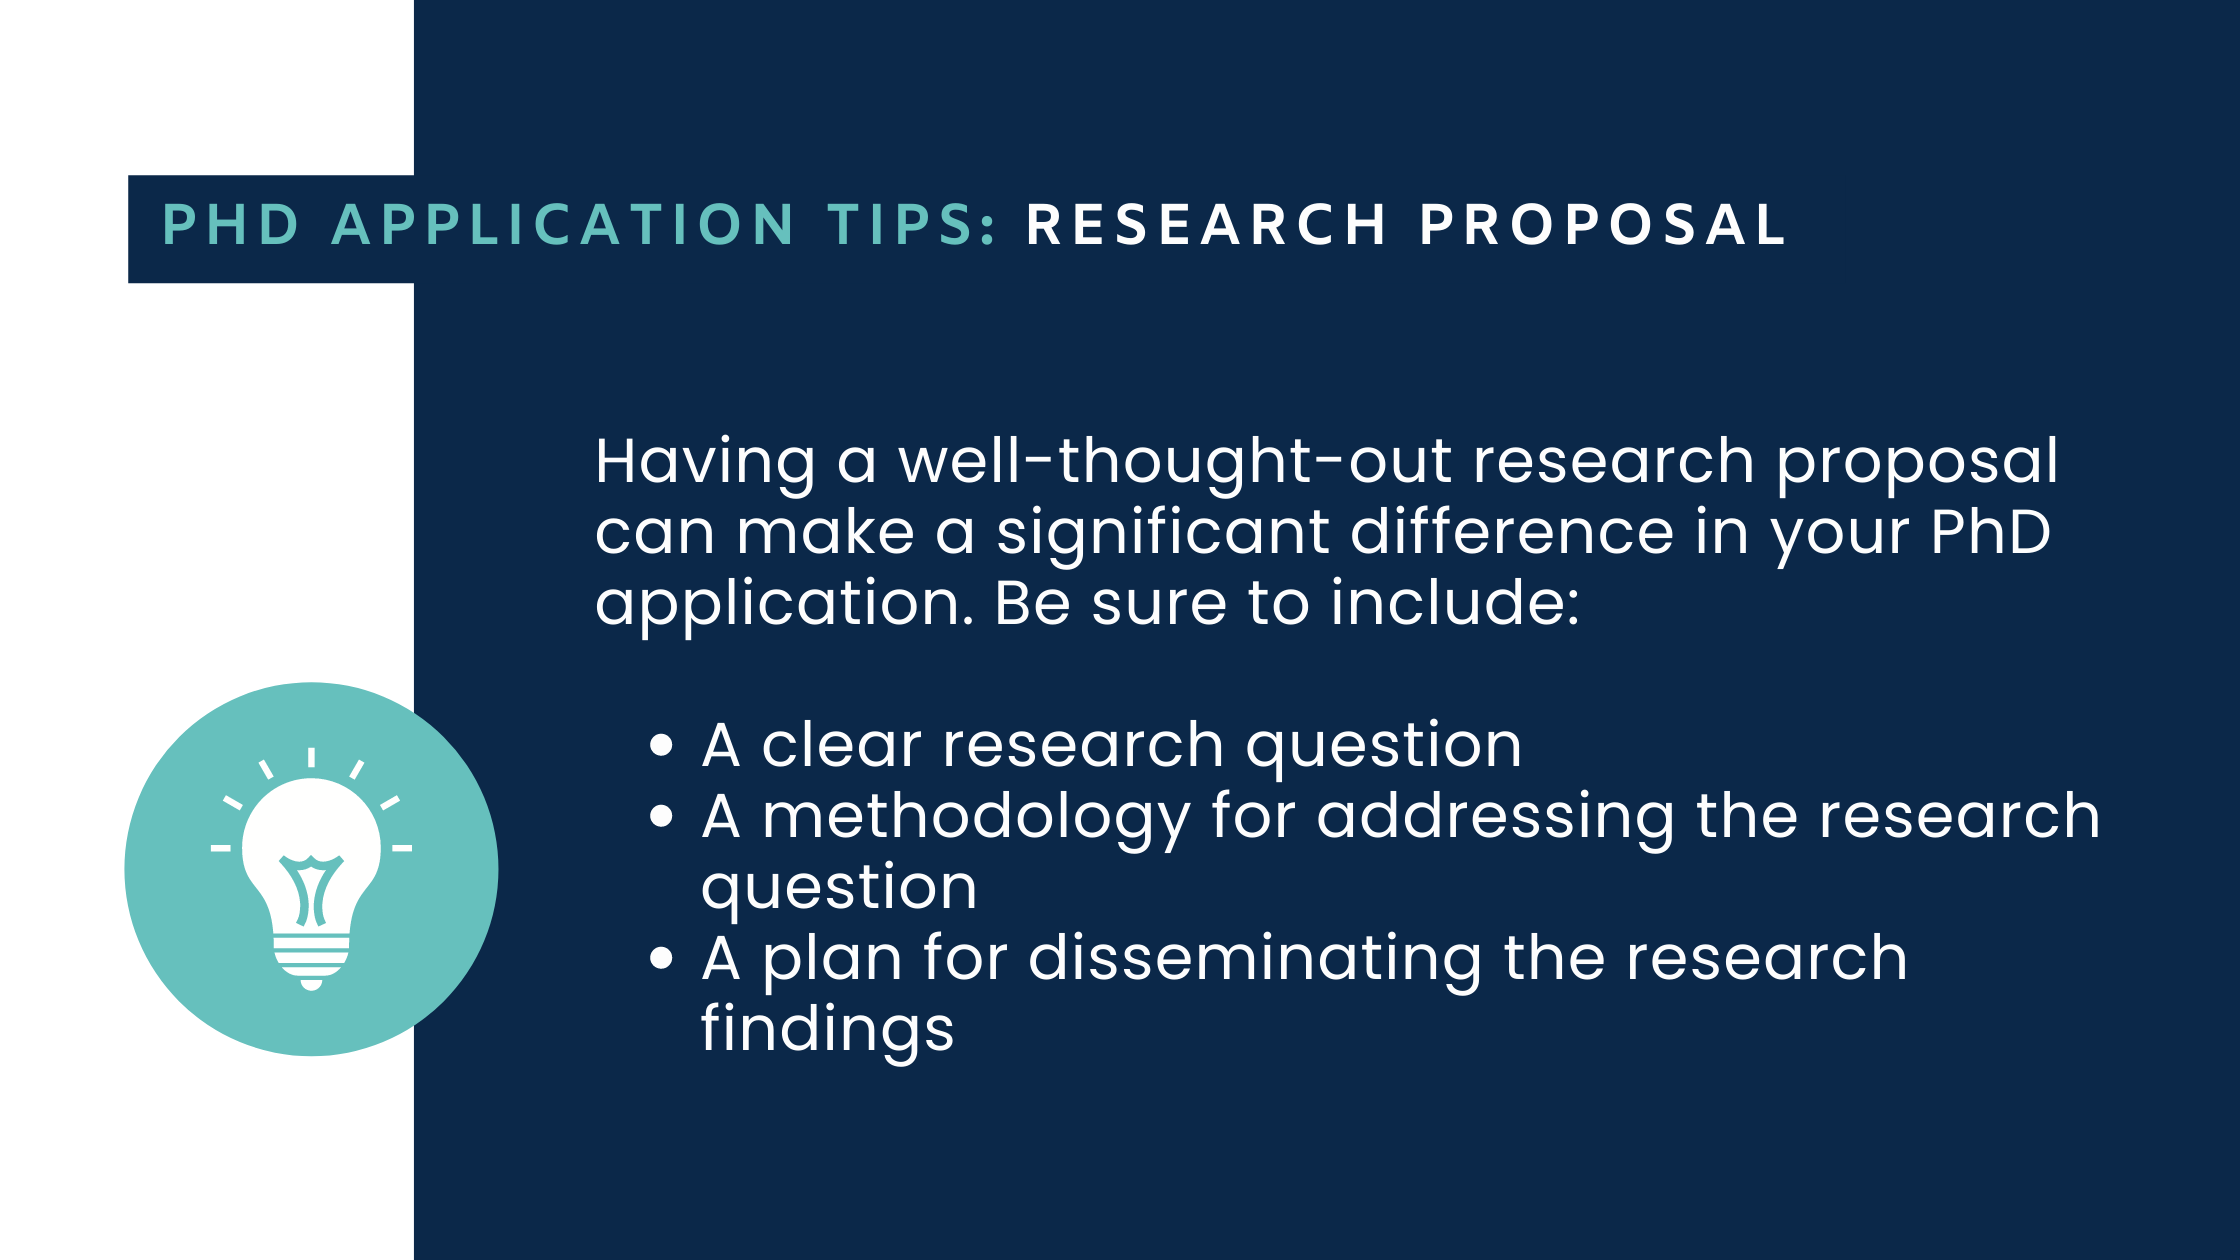 PhD Application Tips - Have a well-thought-out research proposal that includes a clear research question, a methodology for addressing it and a plan for disseminating the research findings. 